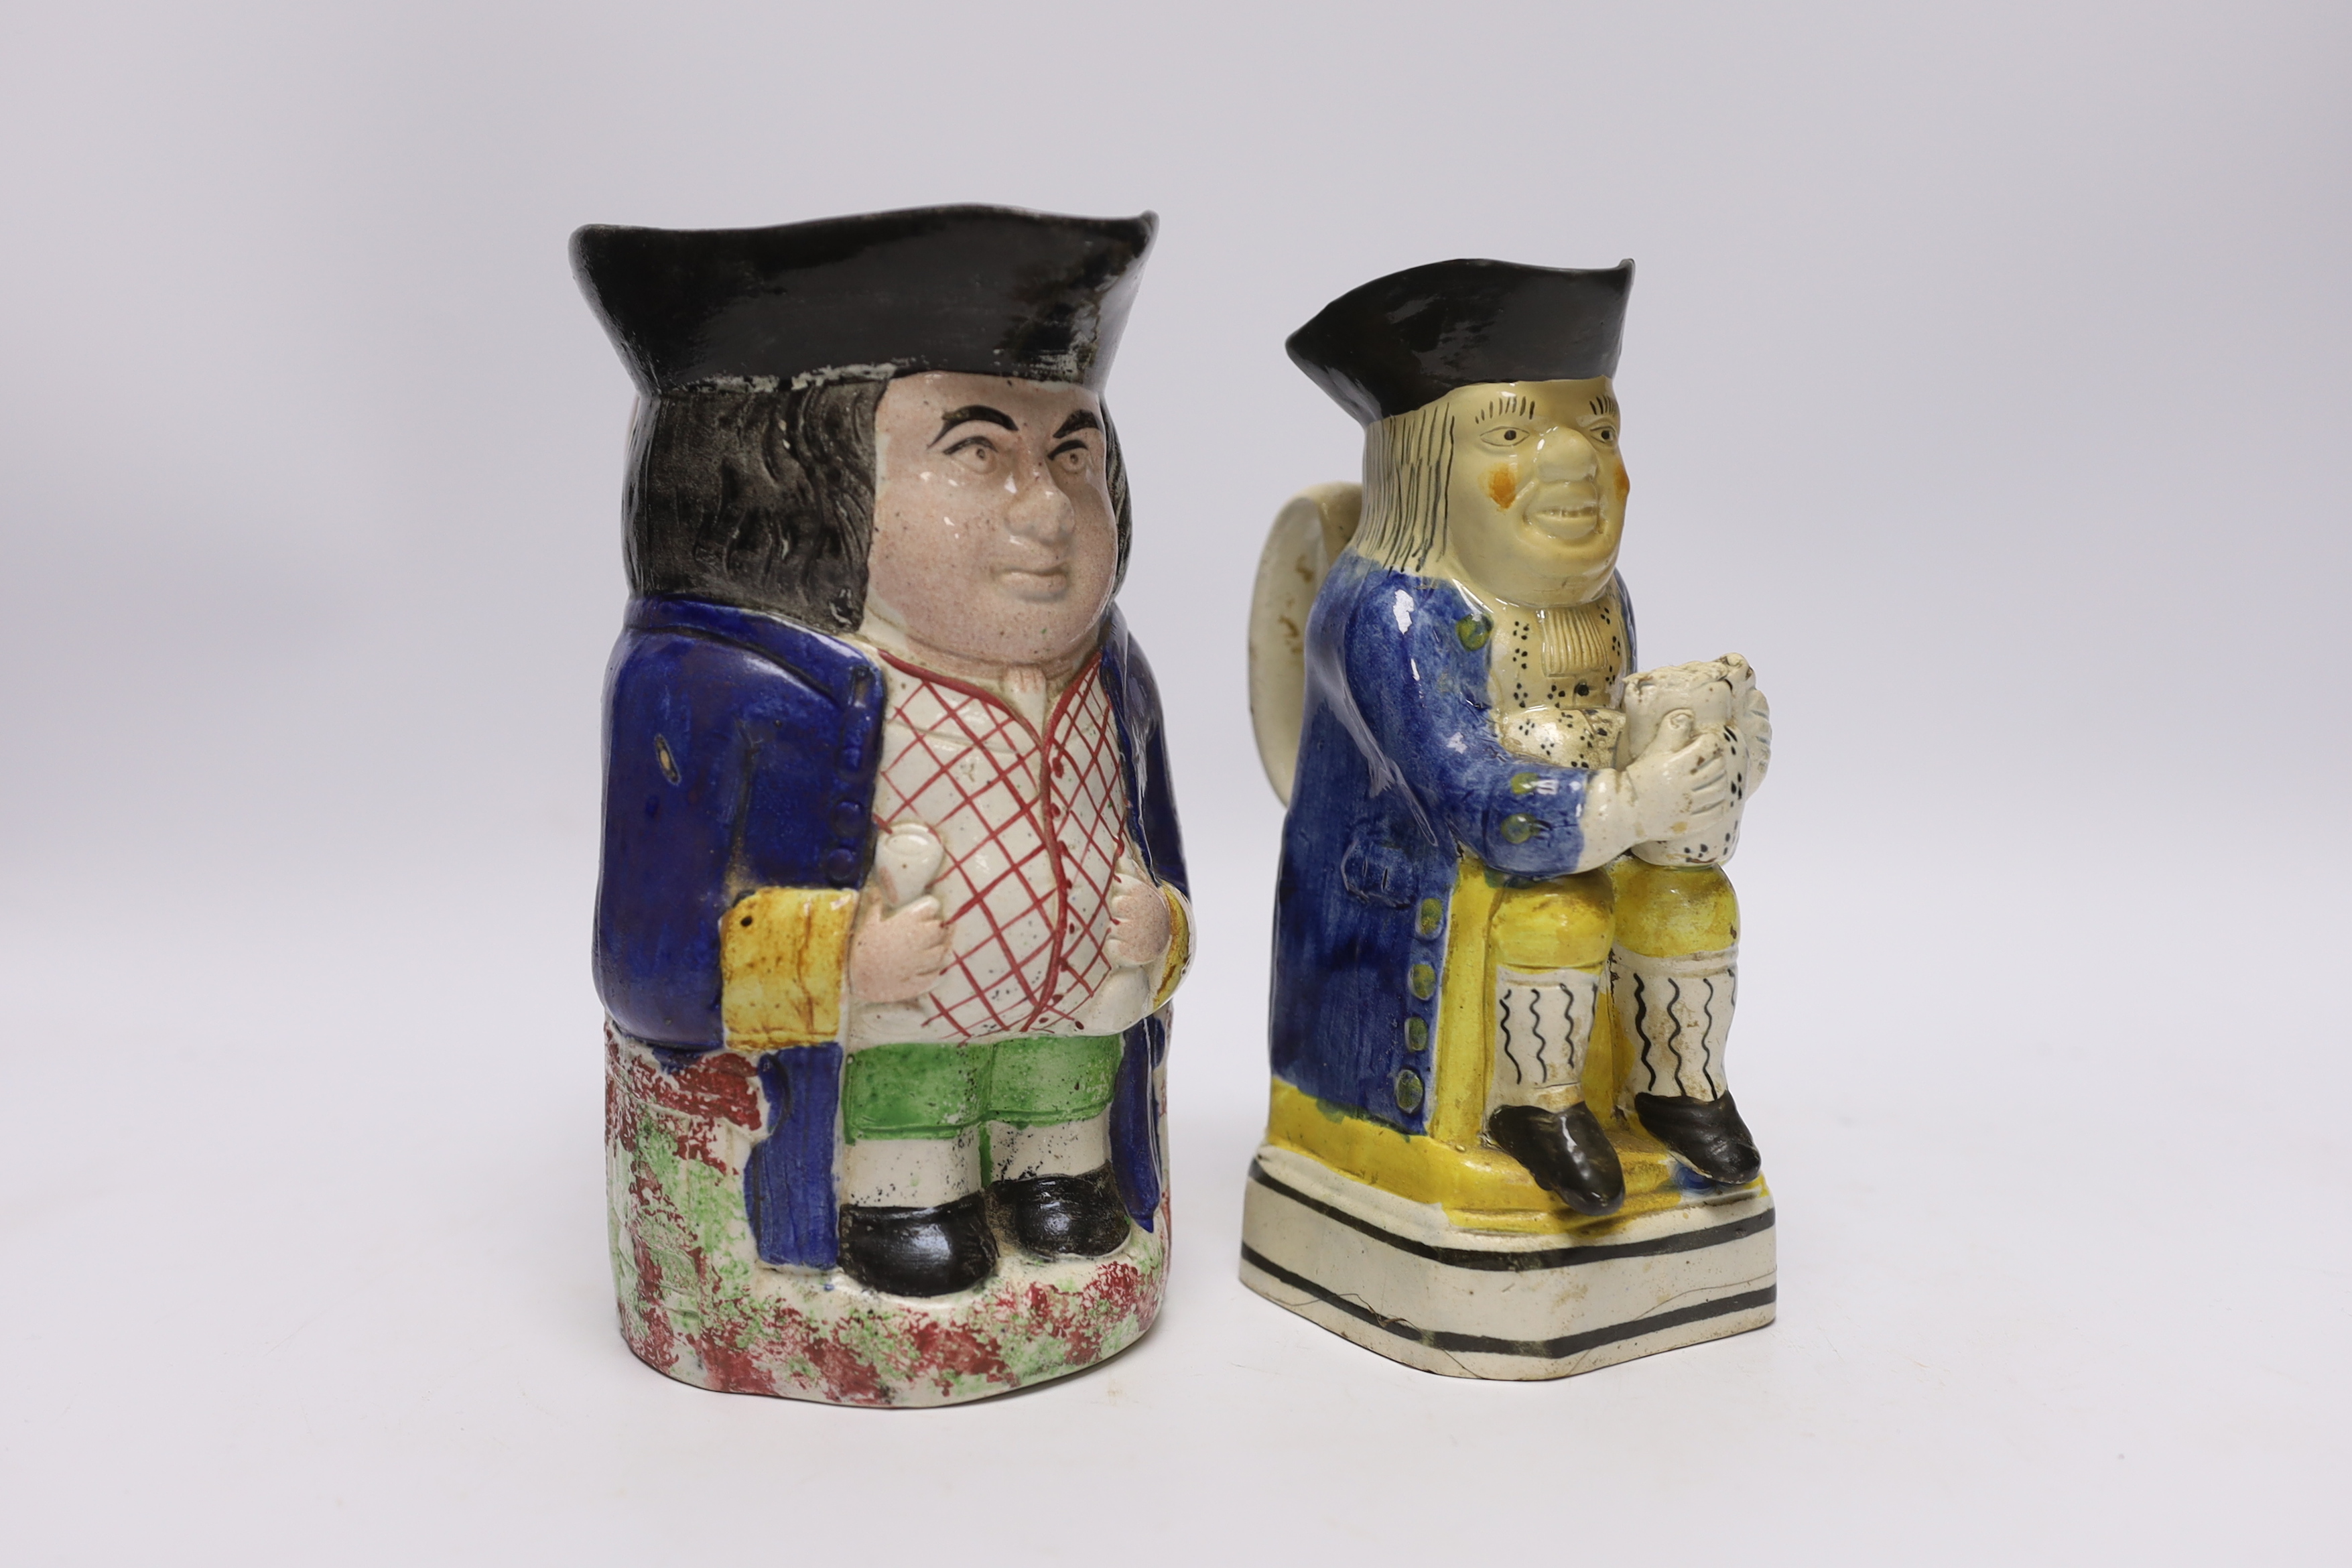 A pearlware Toby jug, c.1795 and late 19th century Staffordshire Toby jug, tallest 19cm                                                                                                                                     